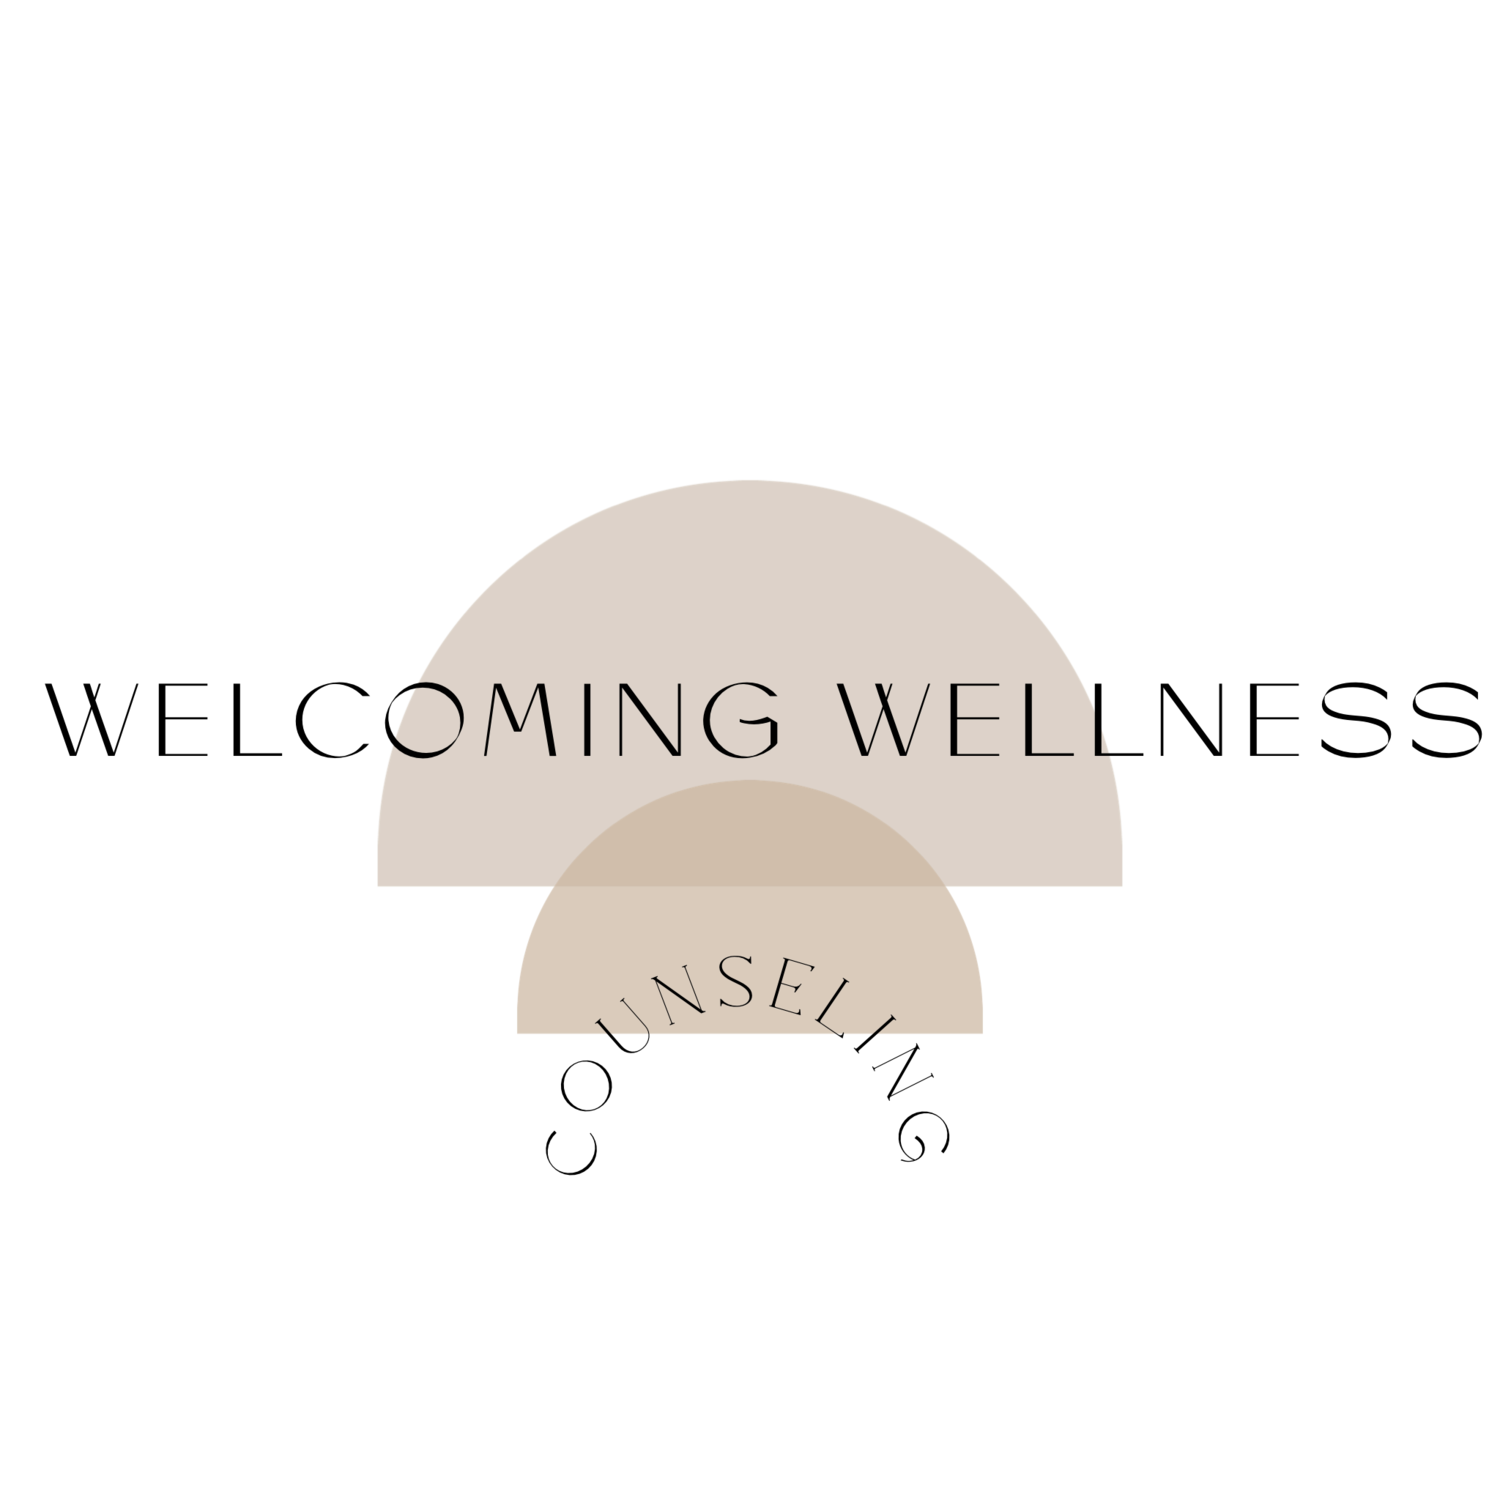 Welcoming Wellness Counseling